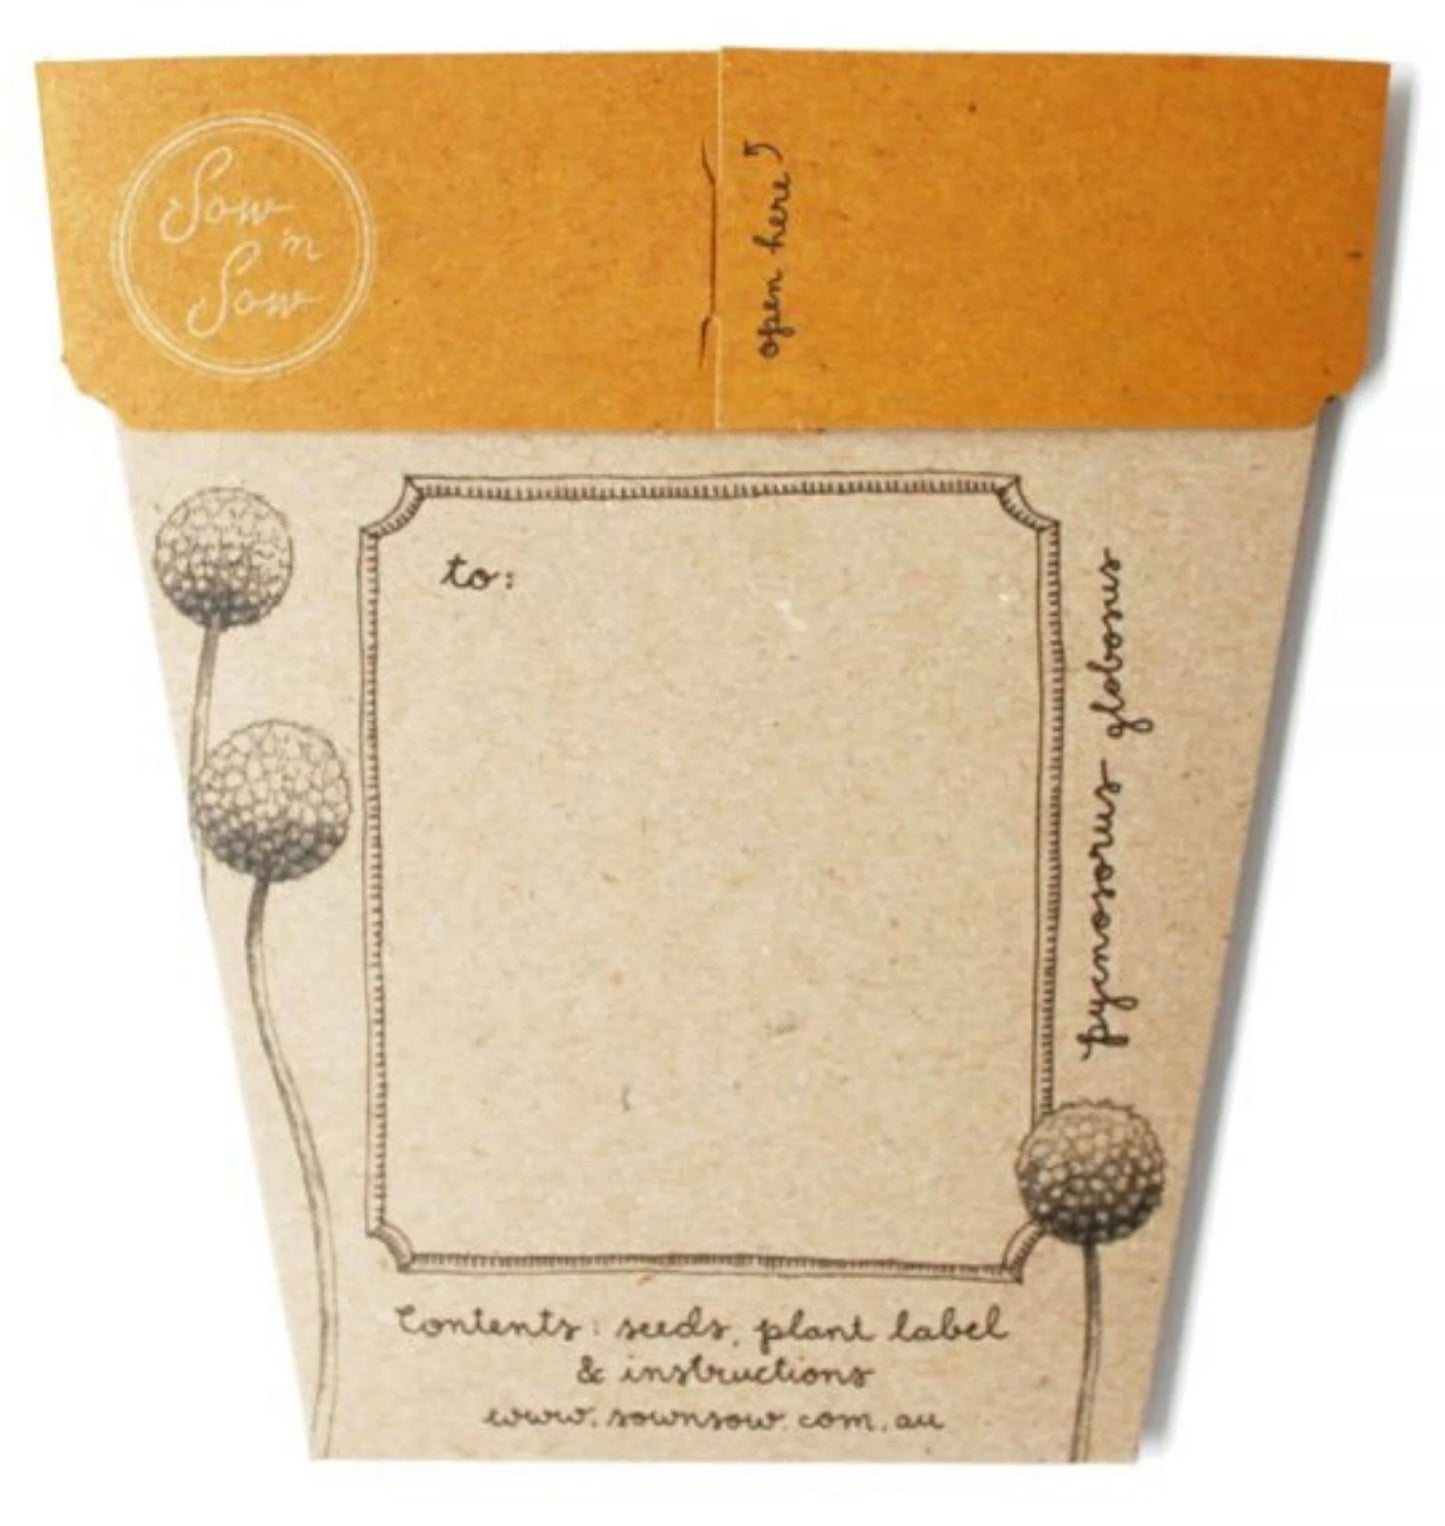 Billy Buttons gift card with seeds